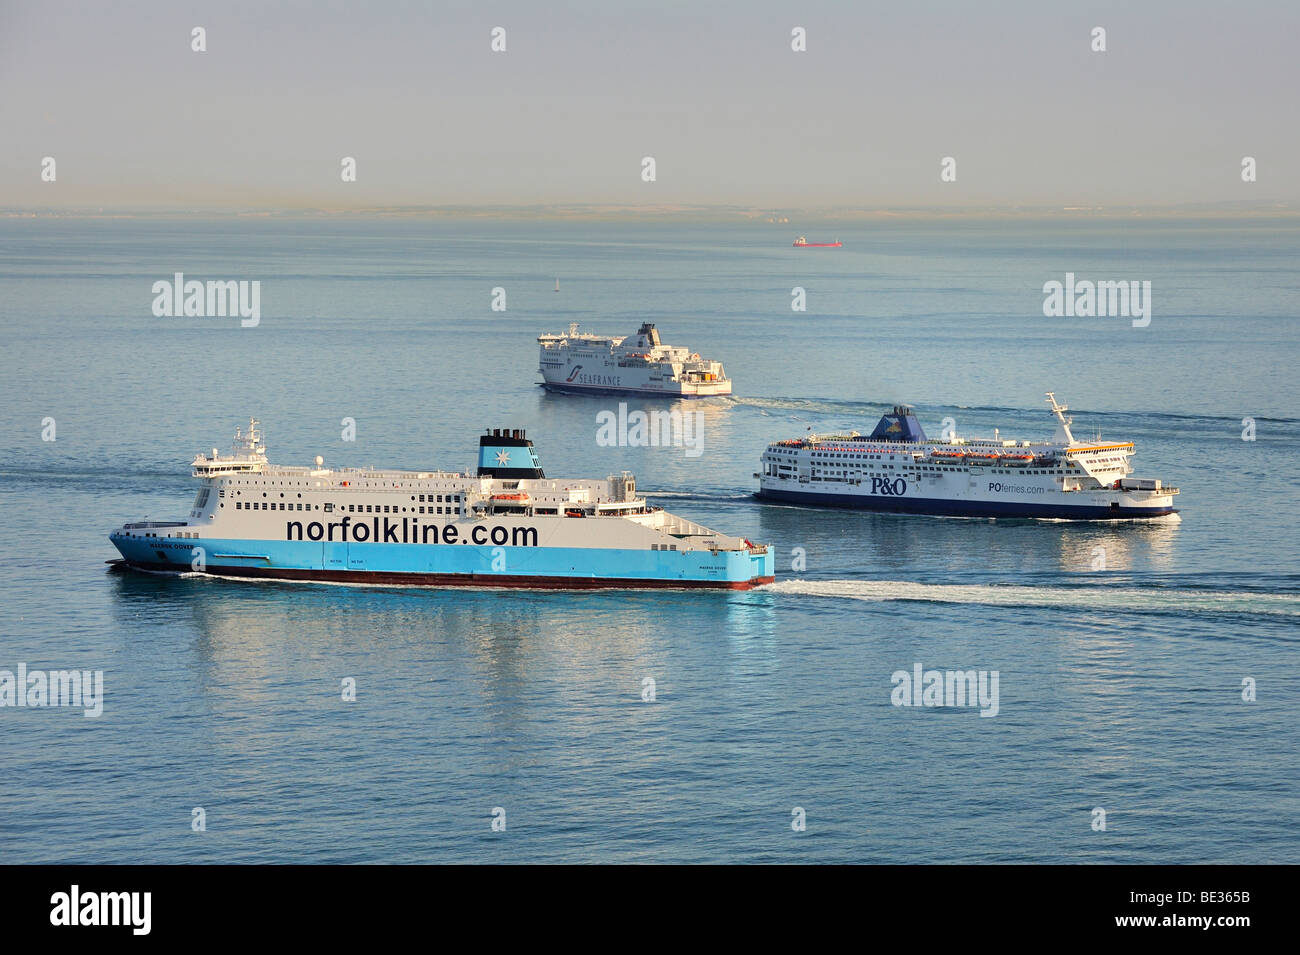 Ferries beating about the Channel in front of the ferry port of Dover, Kent, England, UK, Europe Stock Photo